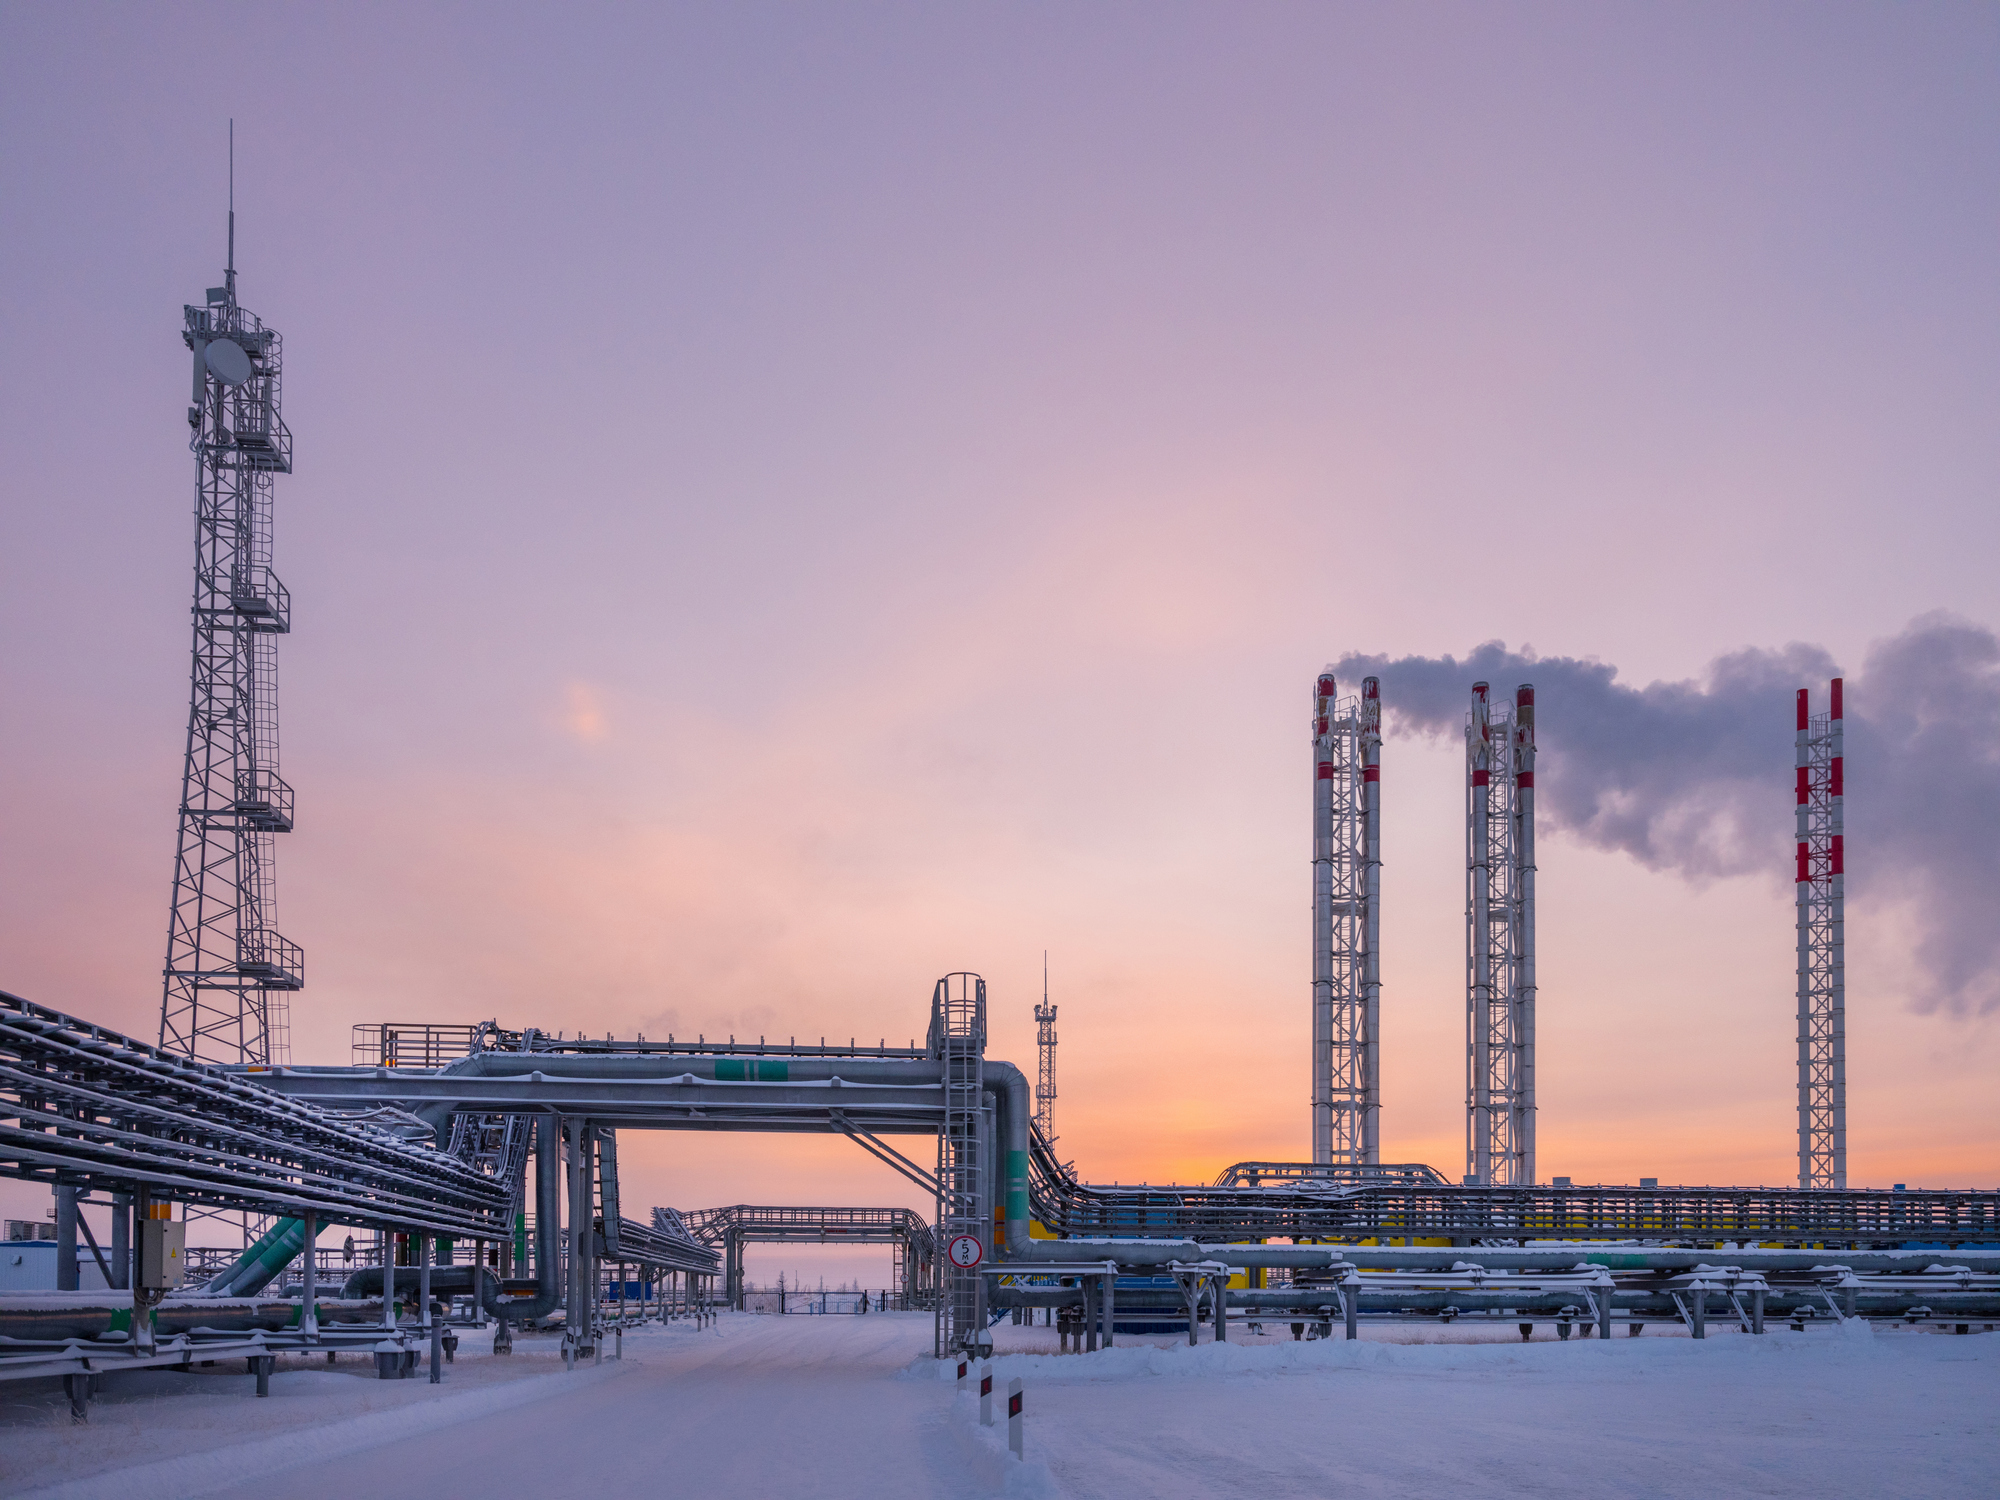 Natural gas production and processing near Novy Urengoi, Russia. (Frank Herfort—Getty Images)